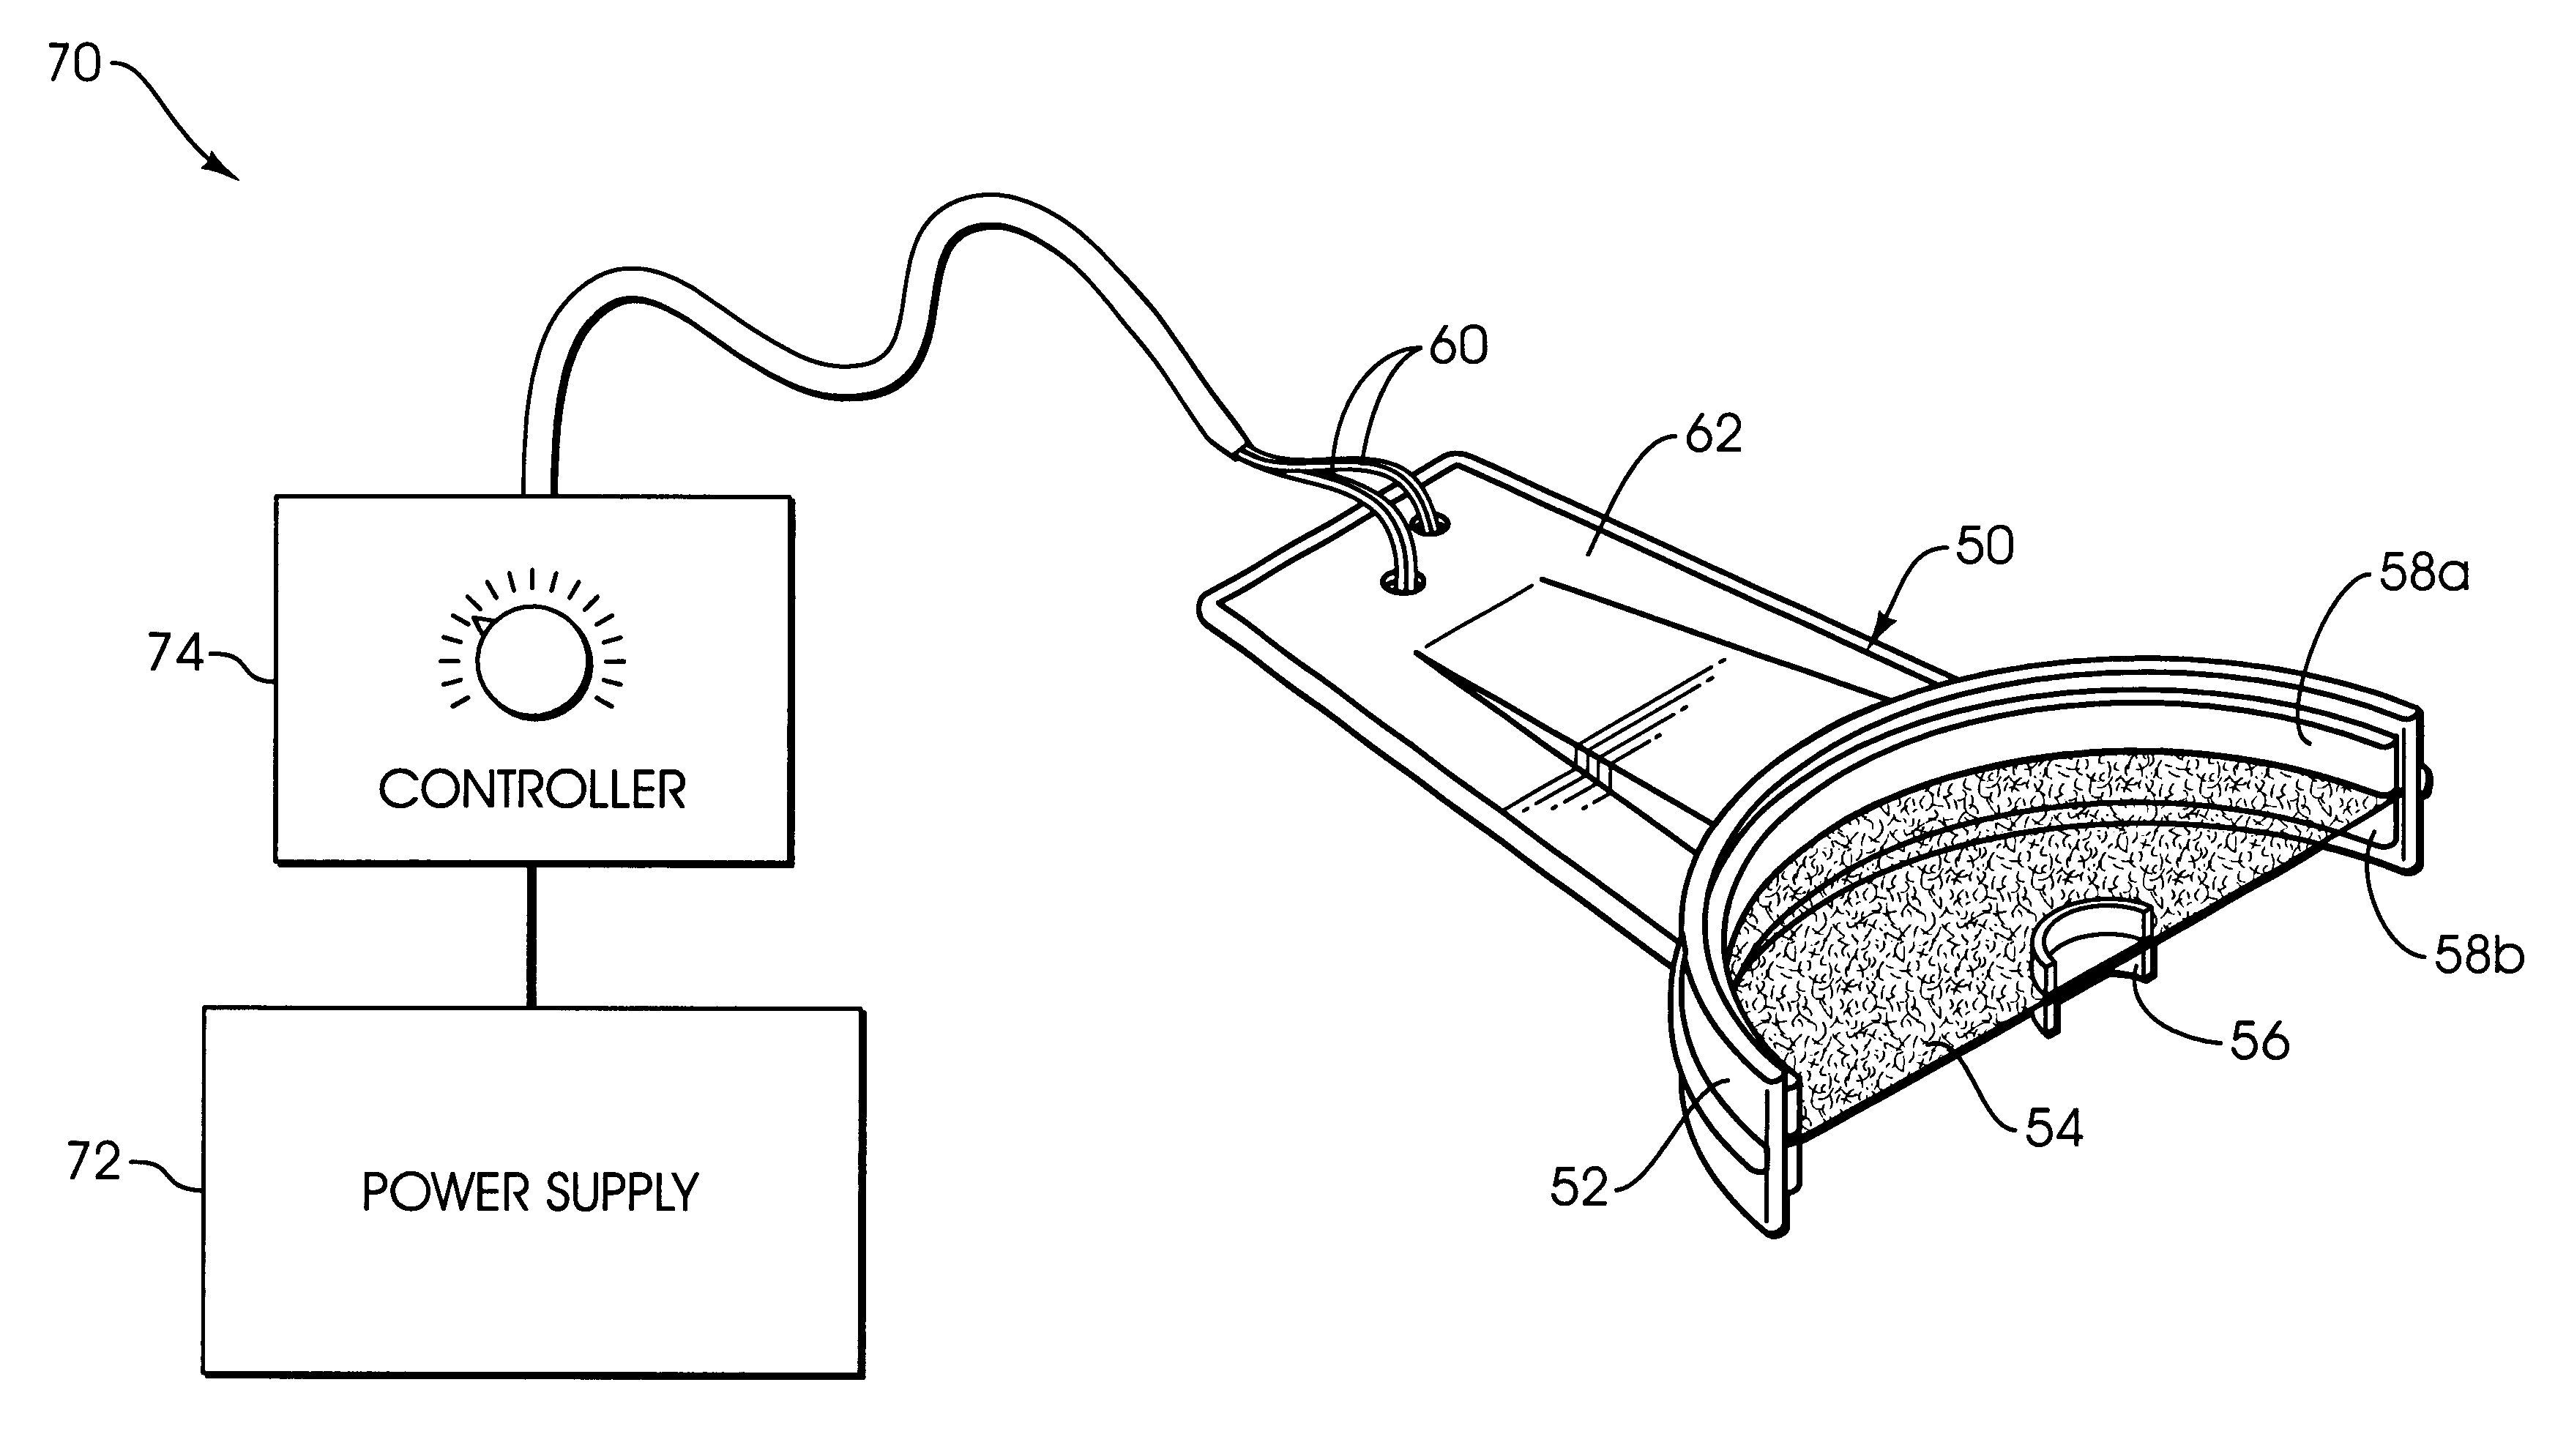 Apparatus and methods for accelerating dental treatments